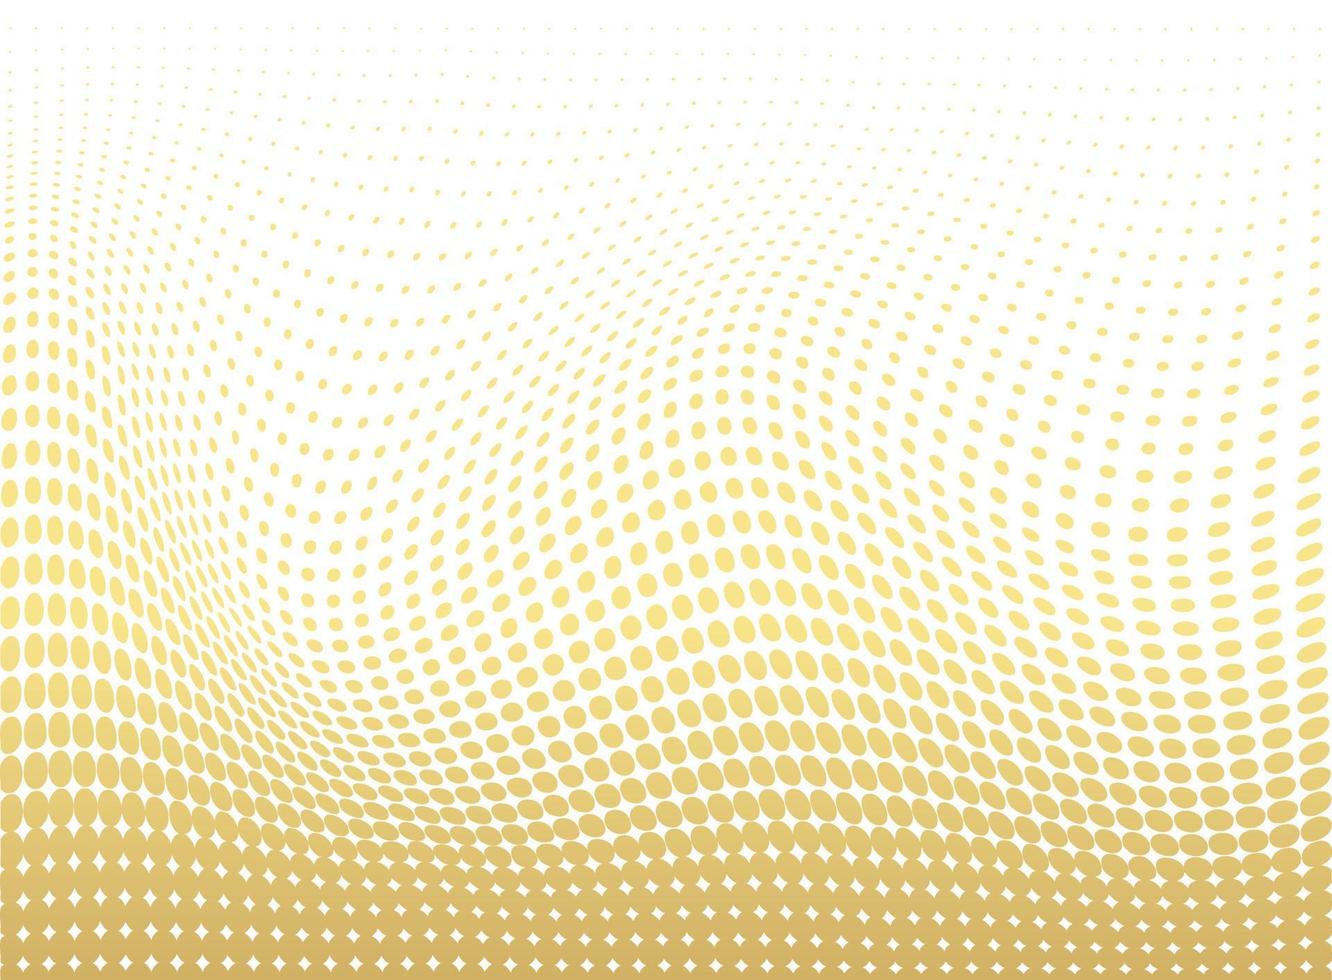 Abstract gold dotted background. Futuristic grunge pattern, dot, wave. Vector modern optical pop art texture for posters, sites, business cards, cover, labels mock-up, vintage layout